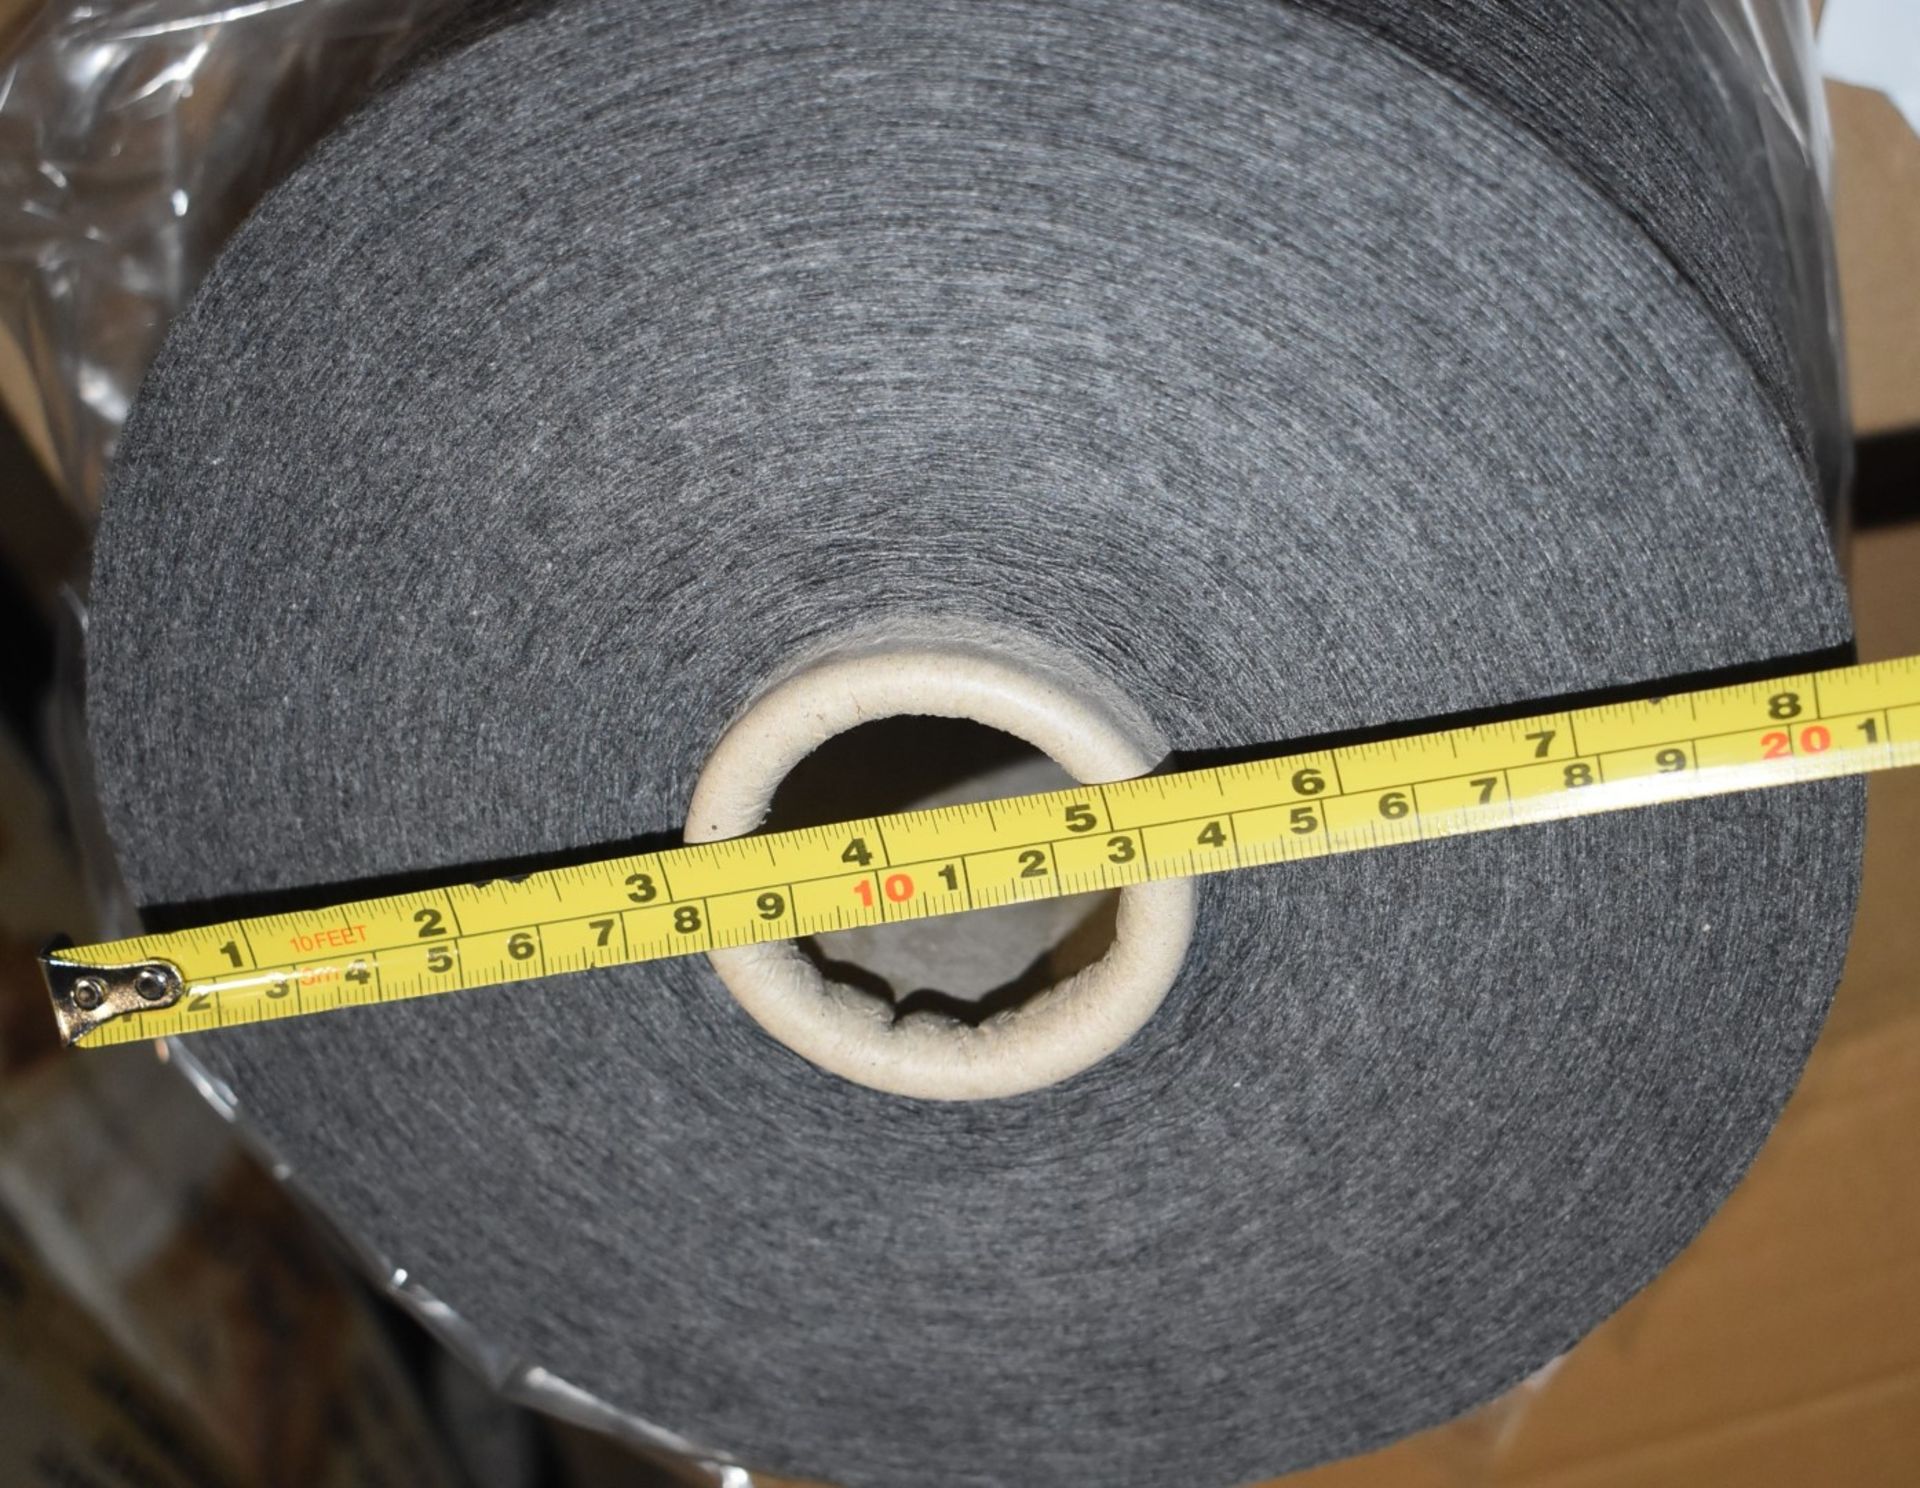 4 x Cones of 1/13 MicroCotton Knitting Yarn - Mid Grey - Approx Weight: 2,500g - New Stock ABL Yarn - Image 12 of 17